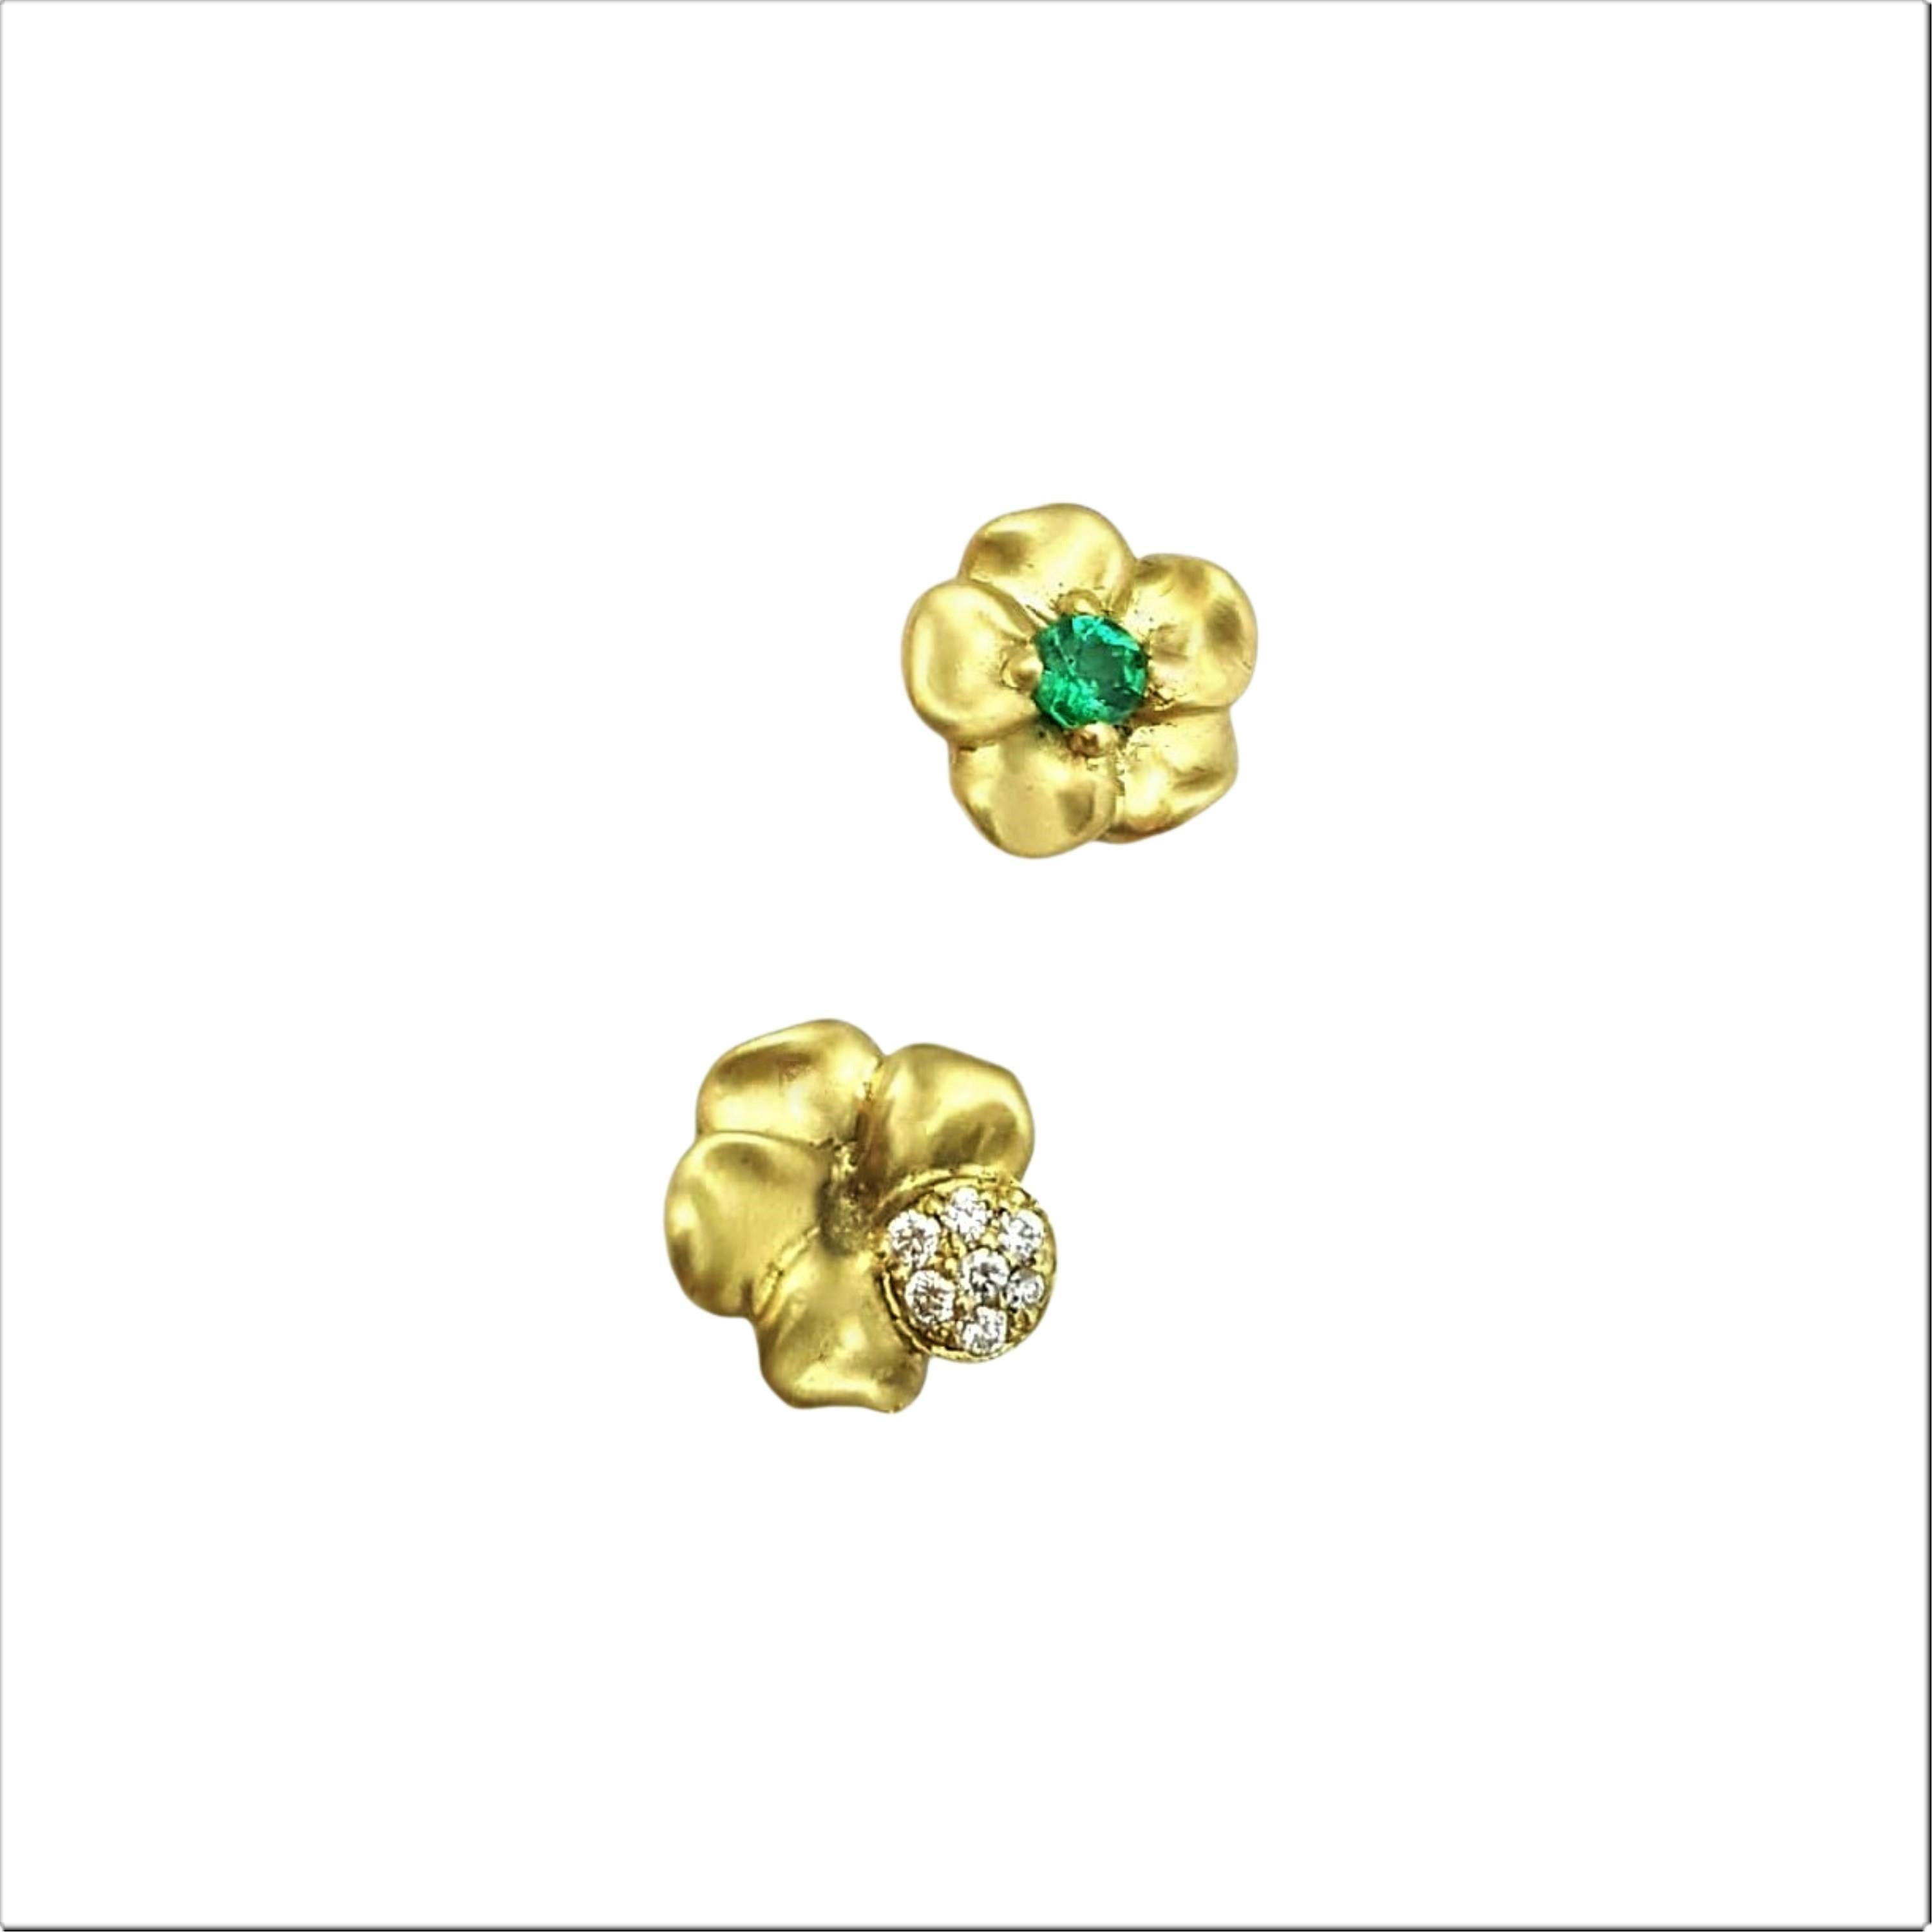 Alison Nagasue has a signature 18K Green Gold sandblast finish with a little polish highlights. Flowers are a strong trend now and these Pansy Earrings work perfectly. Order in mis-matched (emerald in the center of one earring and diamond studded